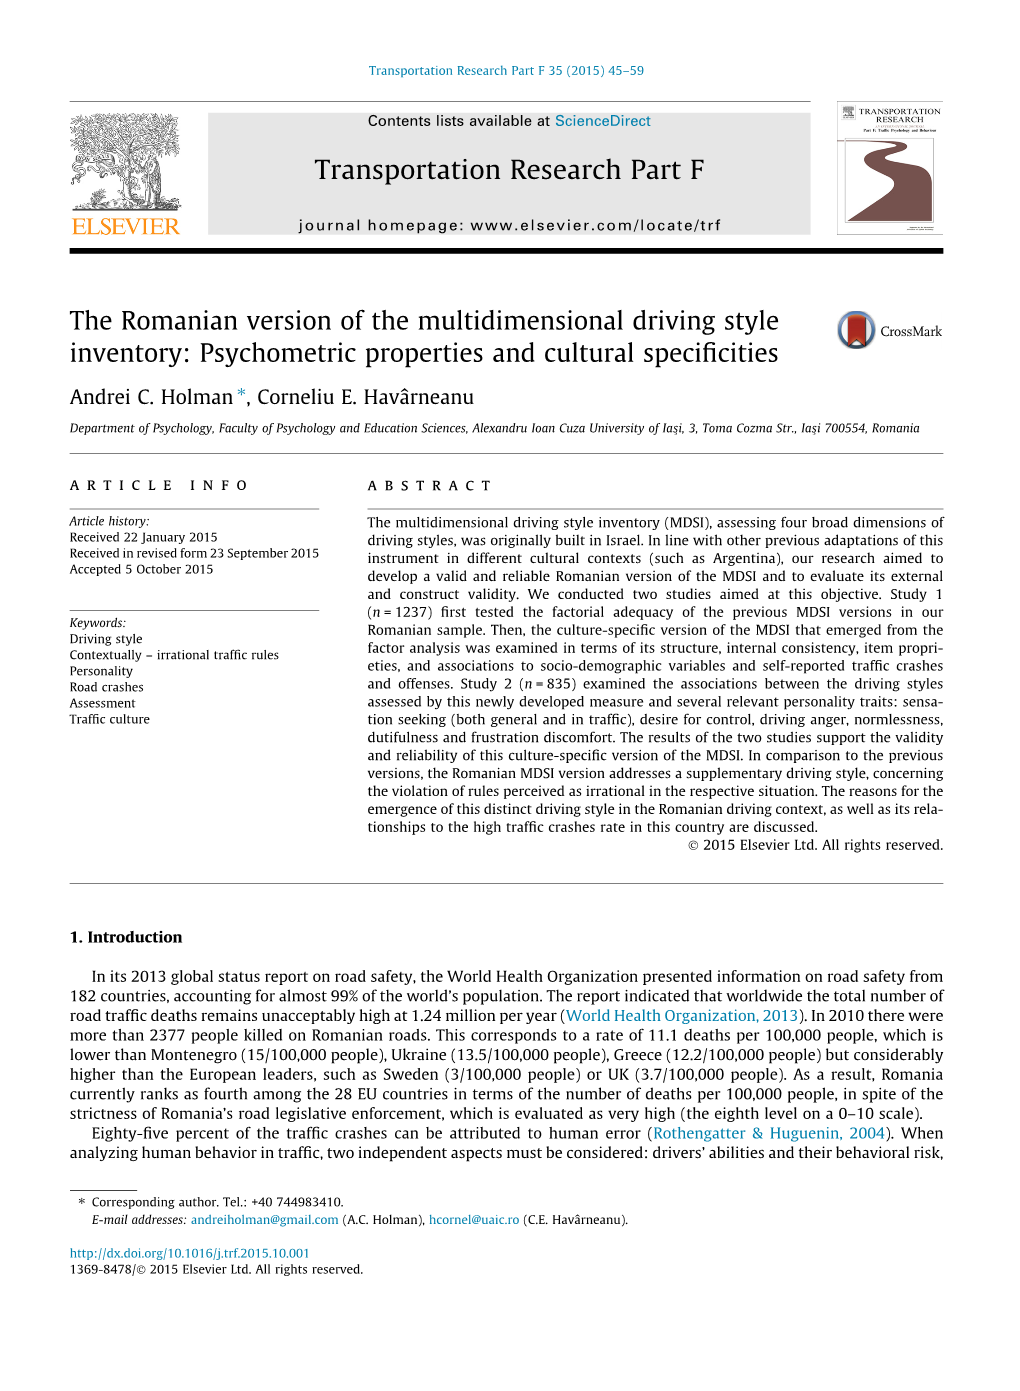 The Romanian Version of the Multidimensional Driving Style Inventory: Psychometric Properties and Cultural Speciﬁcities ⇑ Andrei C